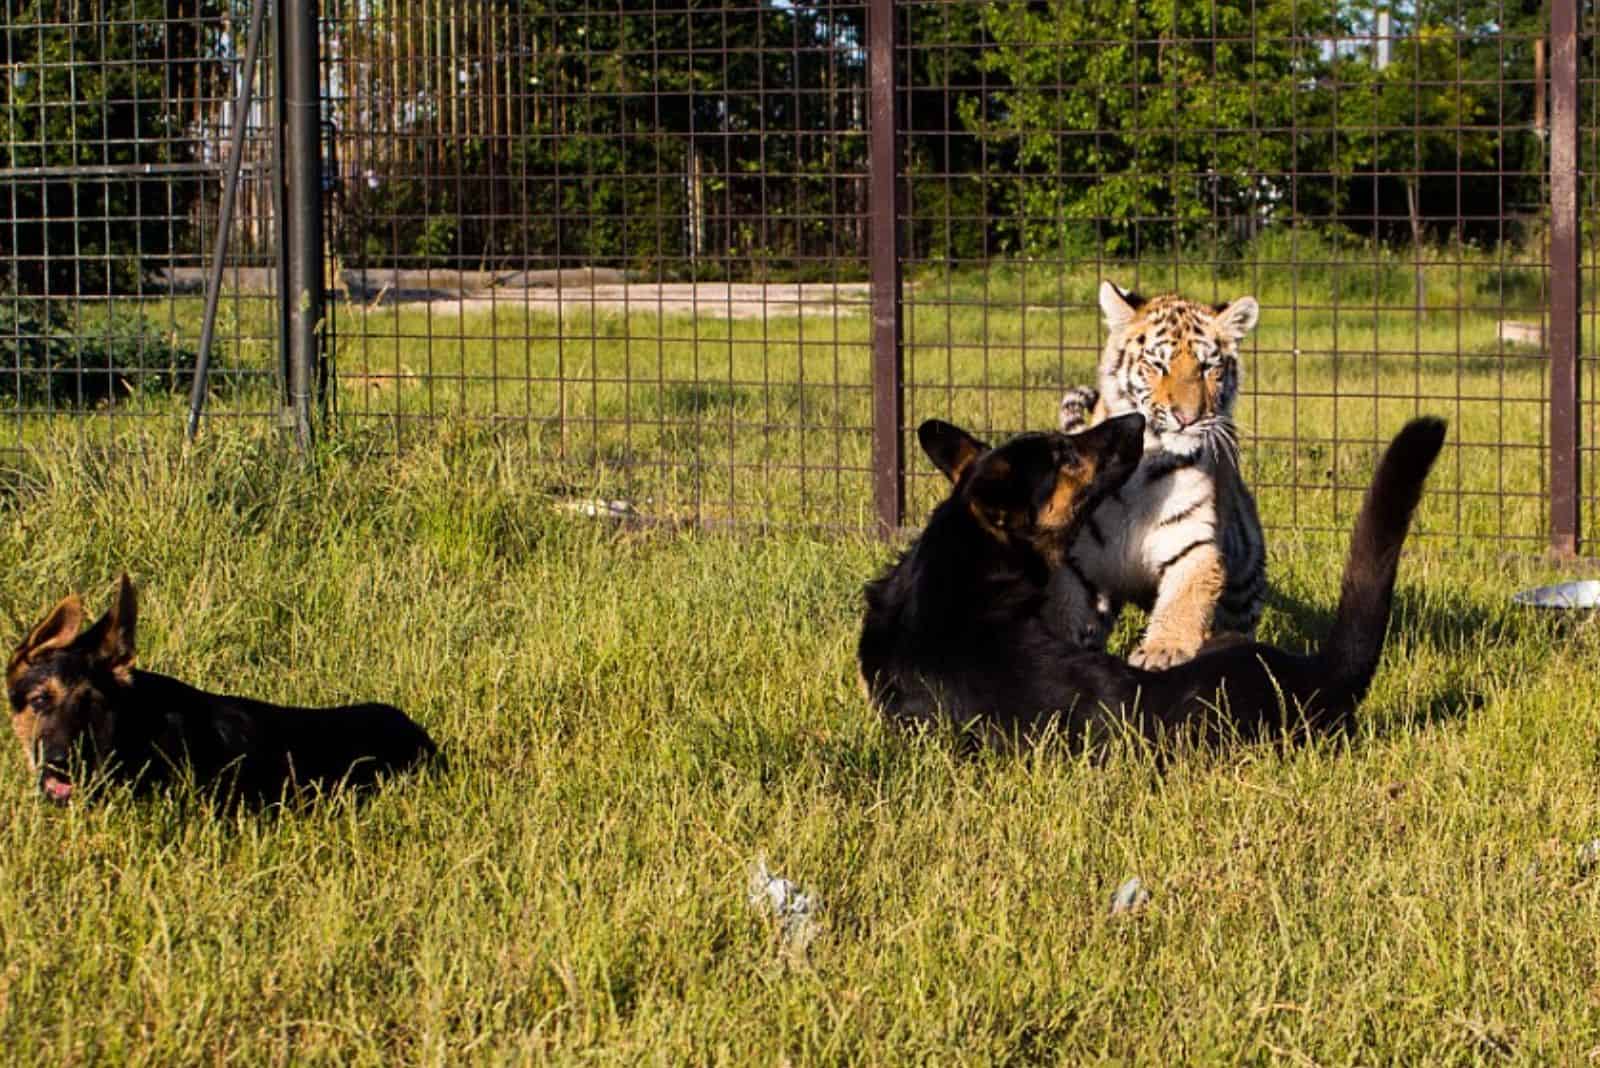 german shepherd dog playing with a tiger in the grass